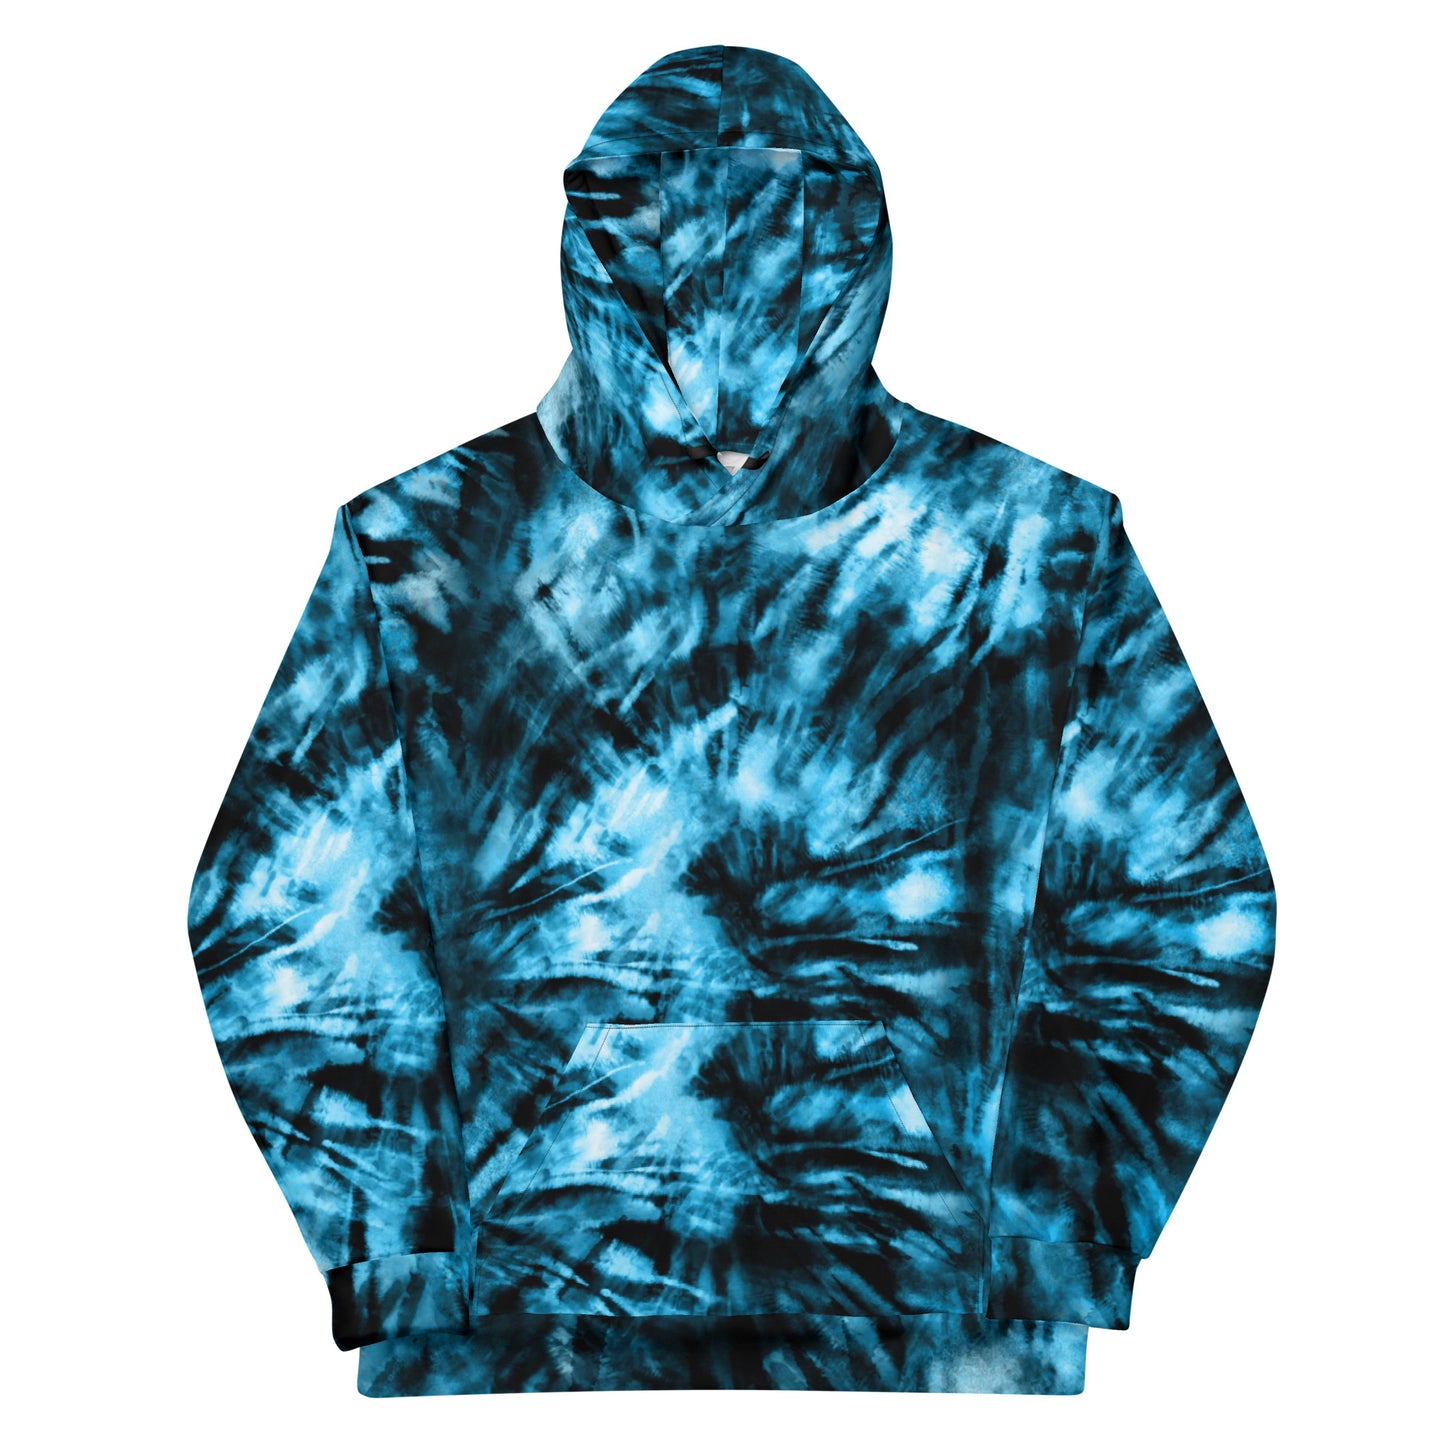 Blue Tie Dye Hoodie, Pullover Men Women Adult Aesthetic Graphic Cotton Hooded Sweatshirt with Pockets Starcove Fashion